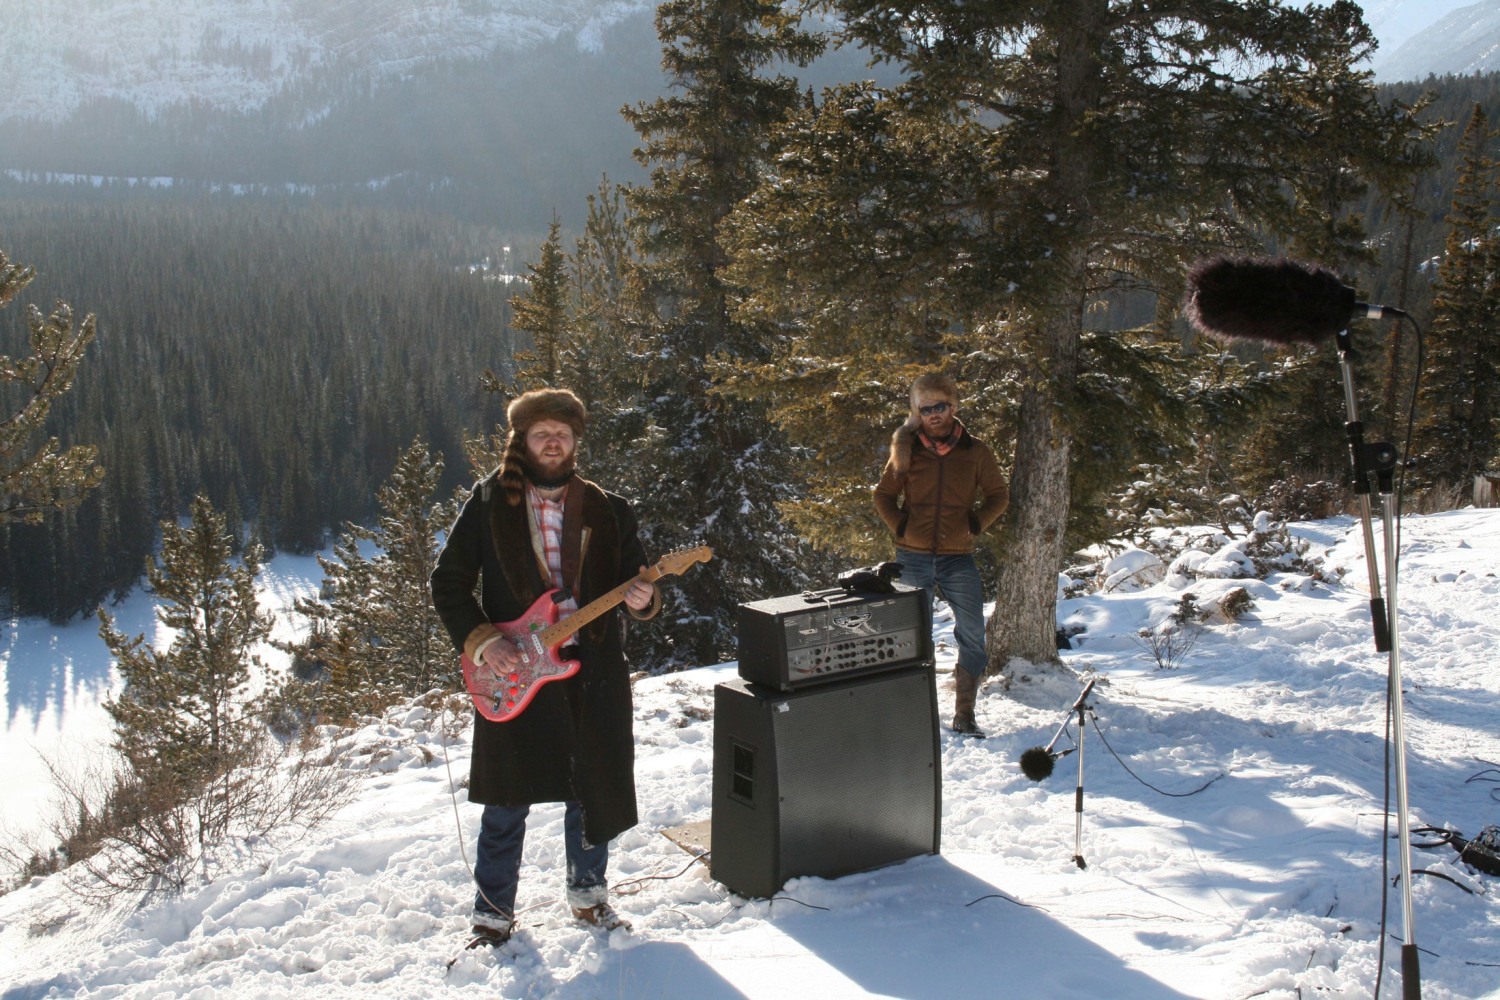 Ragnar Kjartansson
The End &amp;ndash; Rocky Mountains, 2009
Five-channel video
Duration: 30 minutes
Commissioned for the Icelandic Pavilion at the 53rd Venice Biennale, Italy